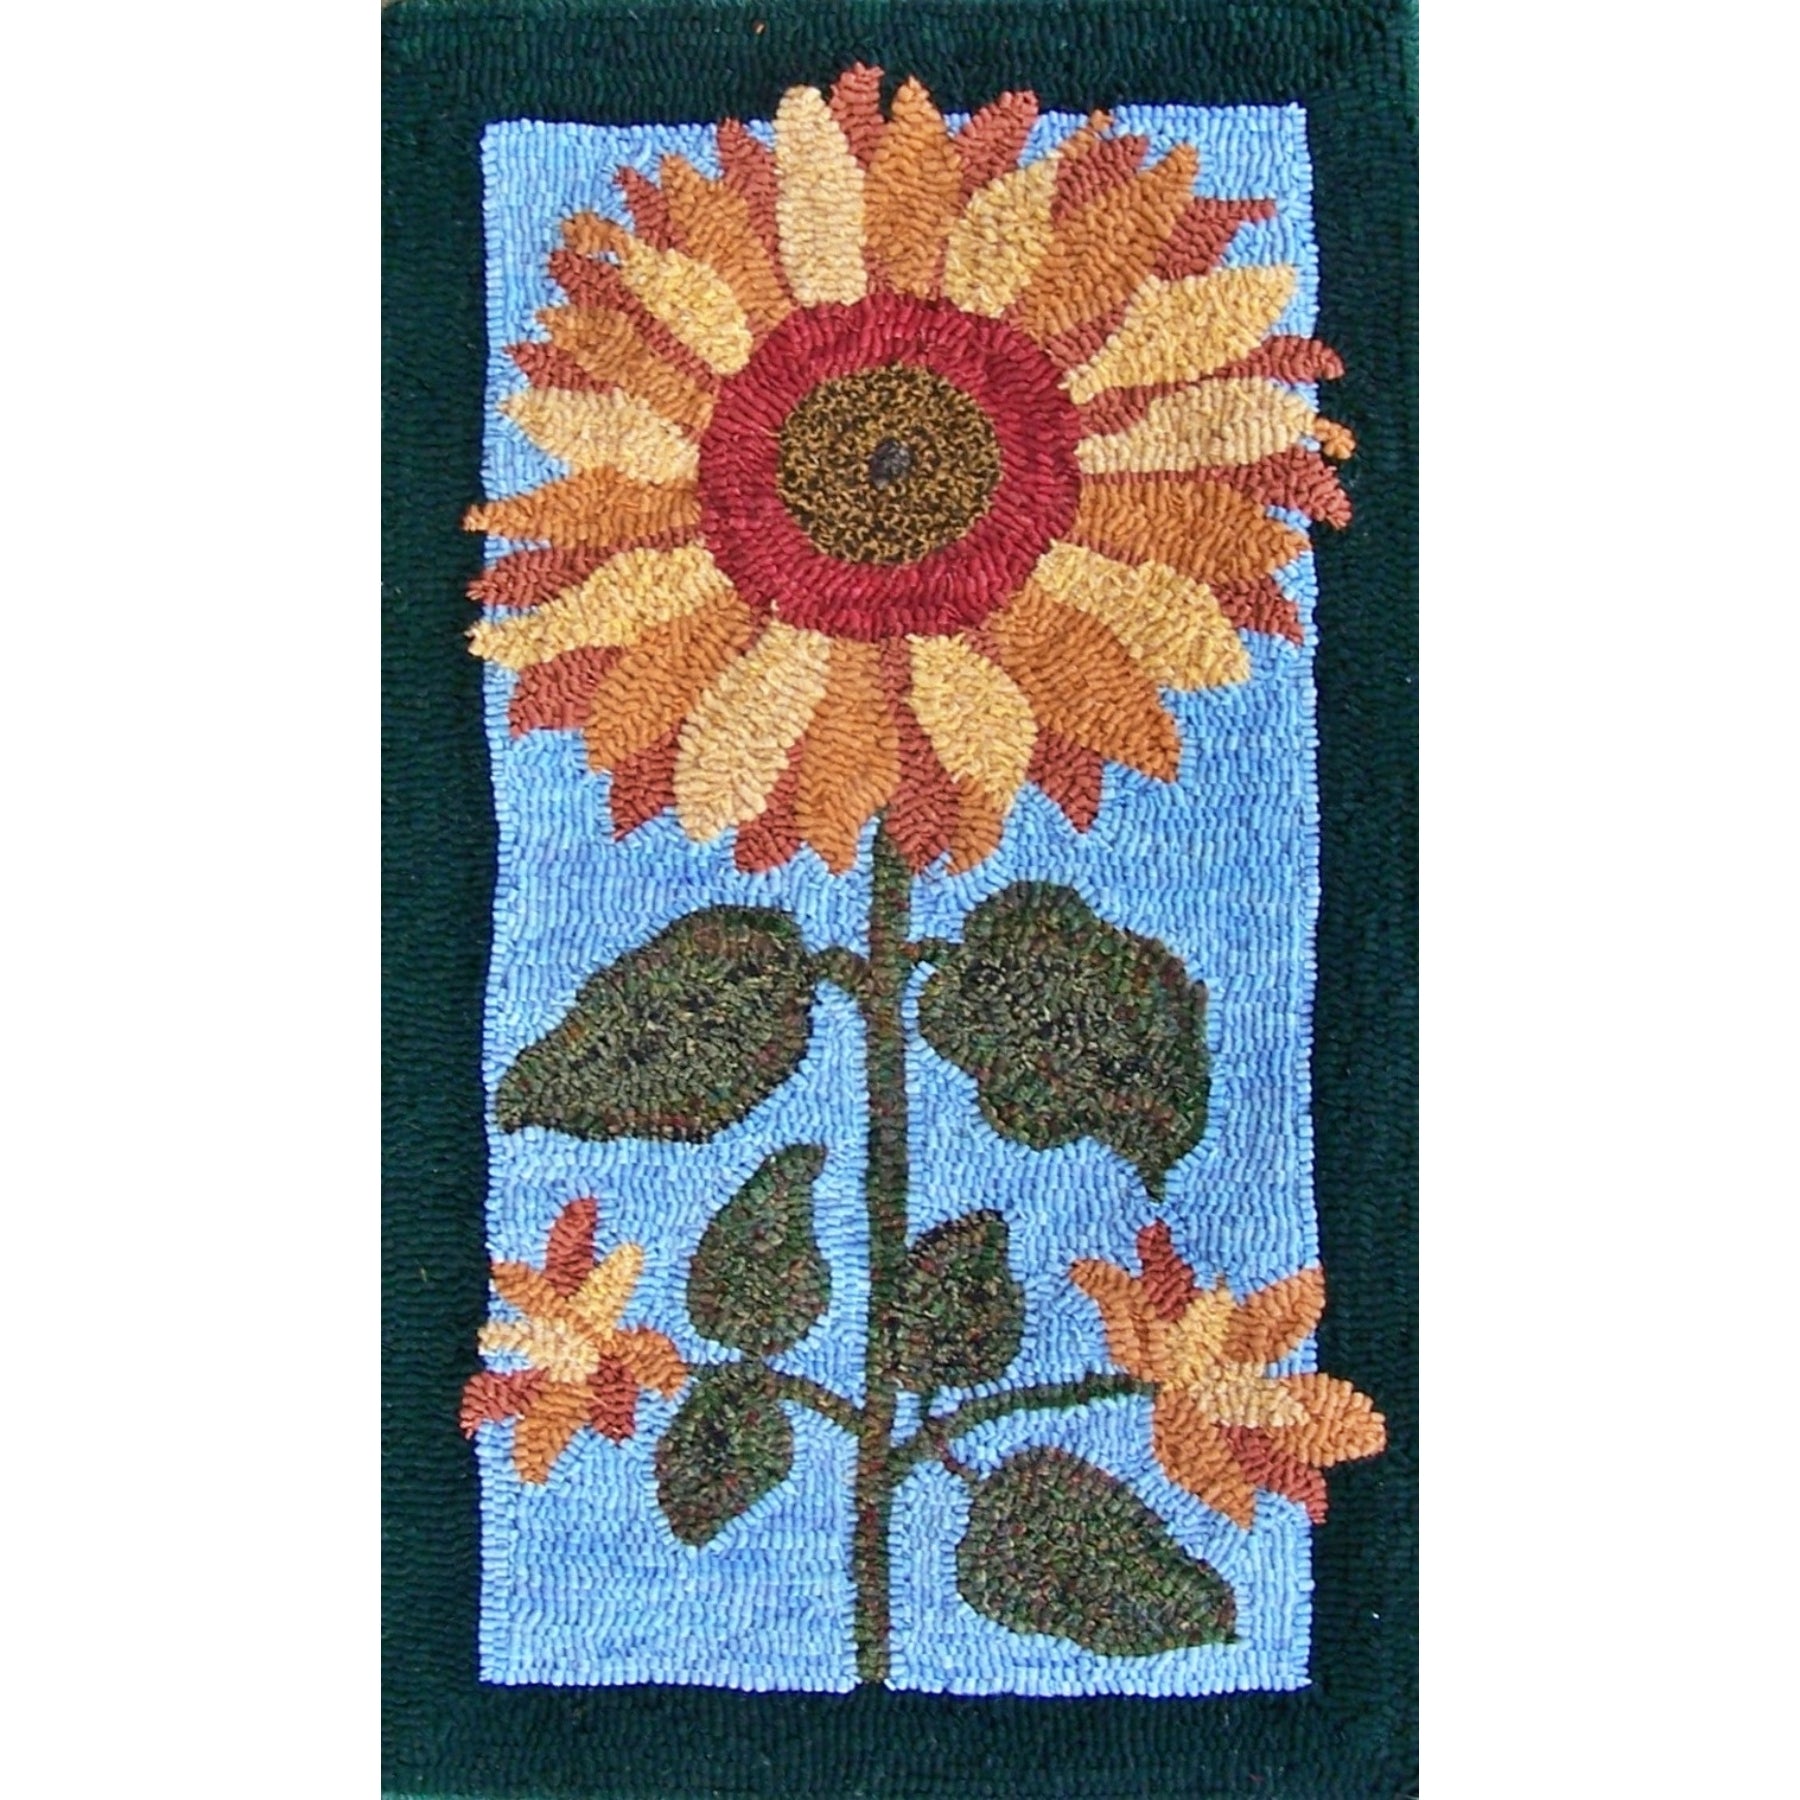 Sunflower, rug hooked by Kathryn Fleming Kovaric